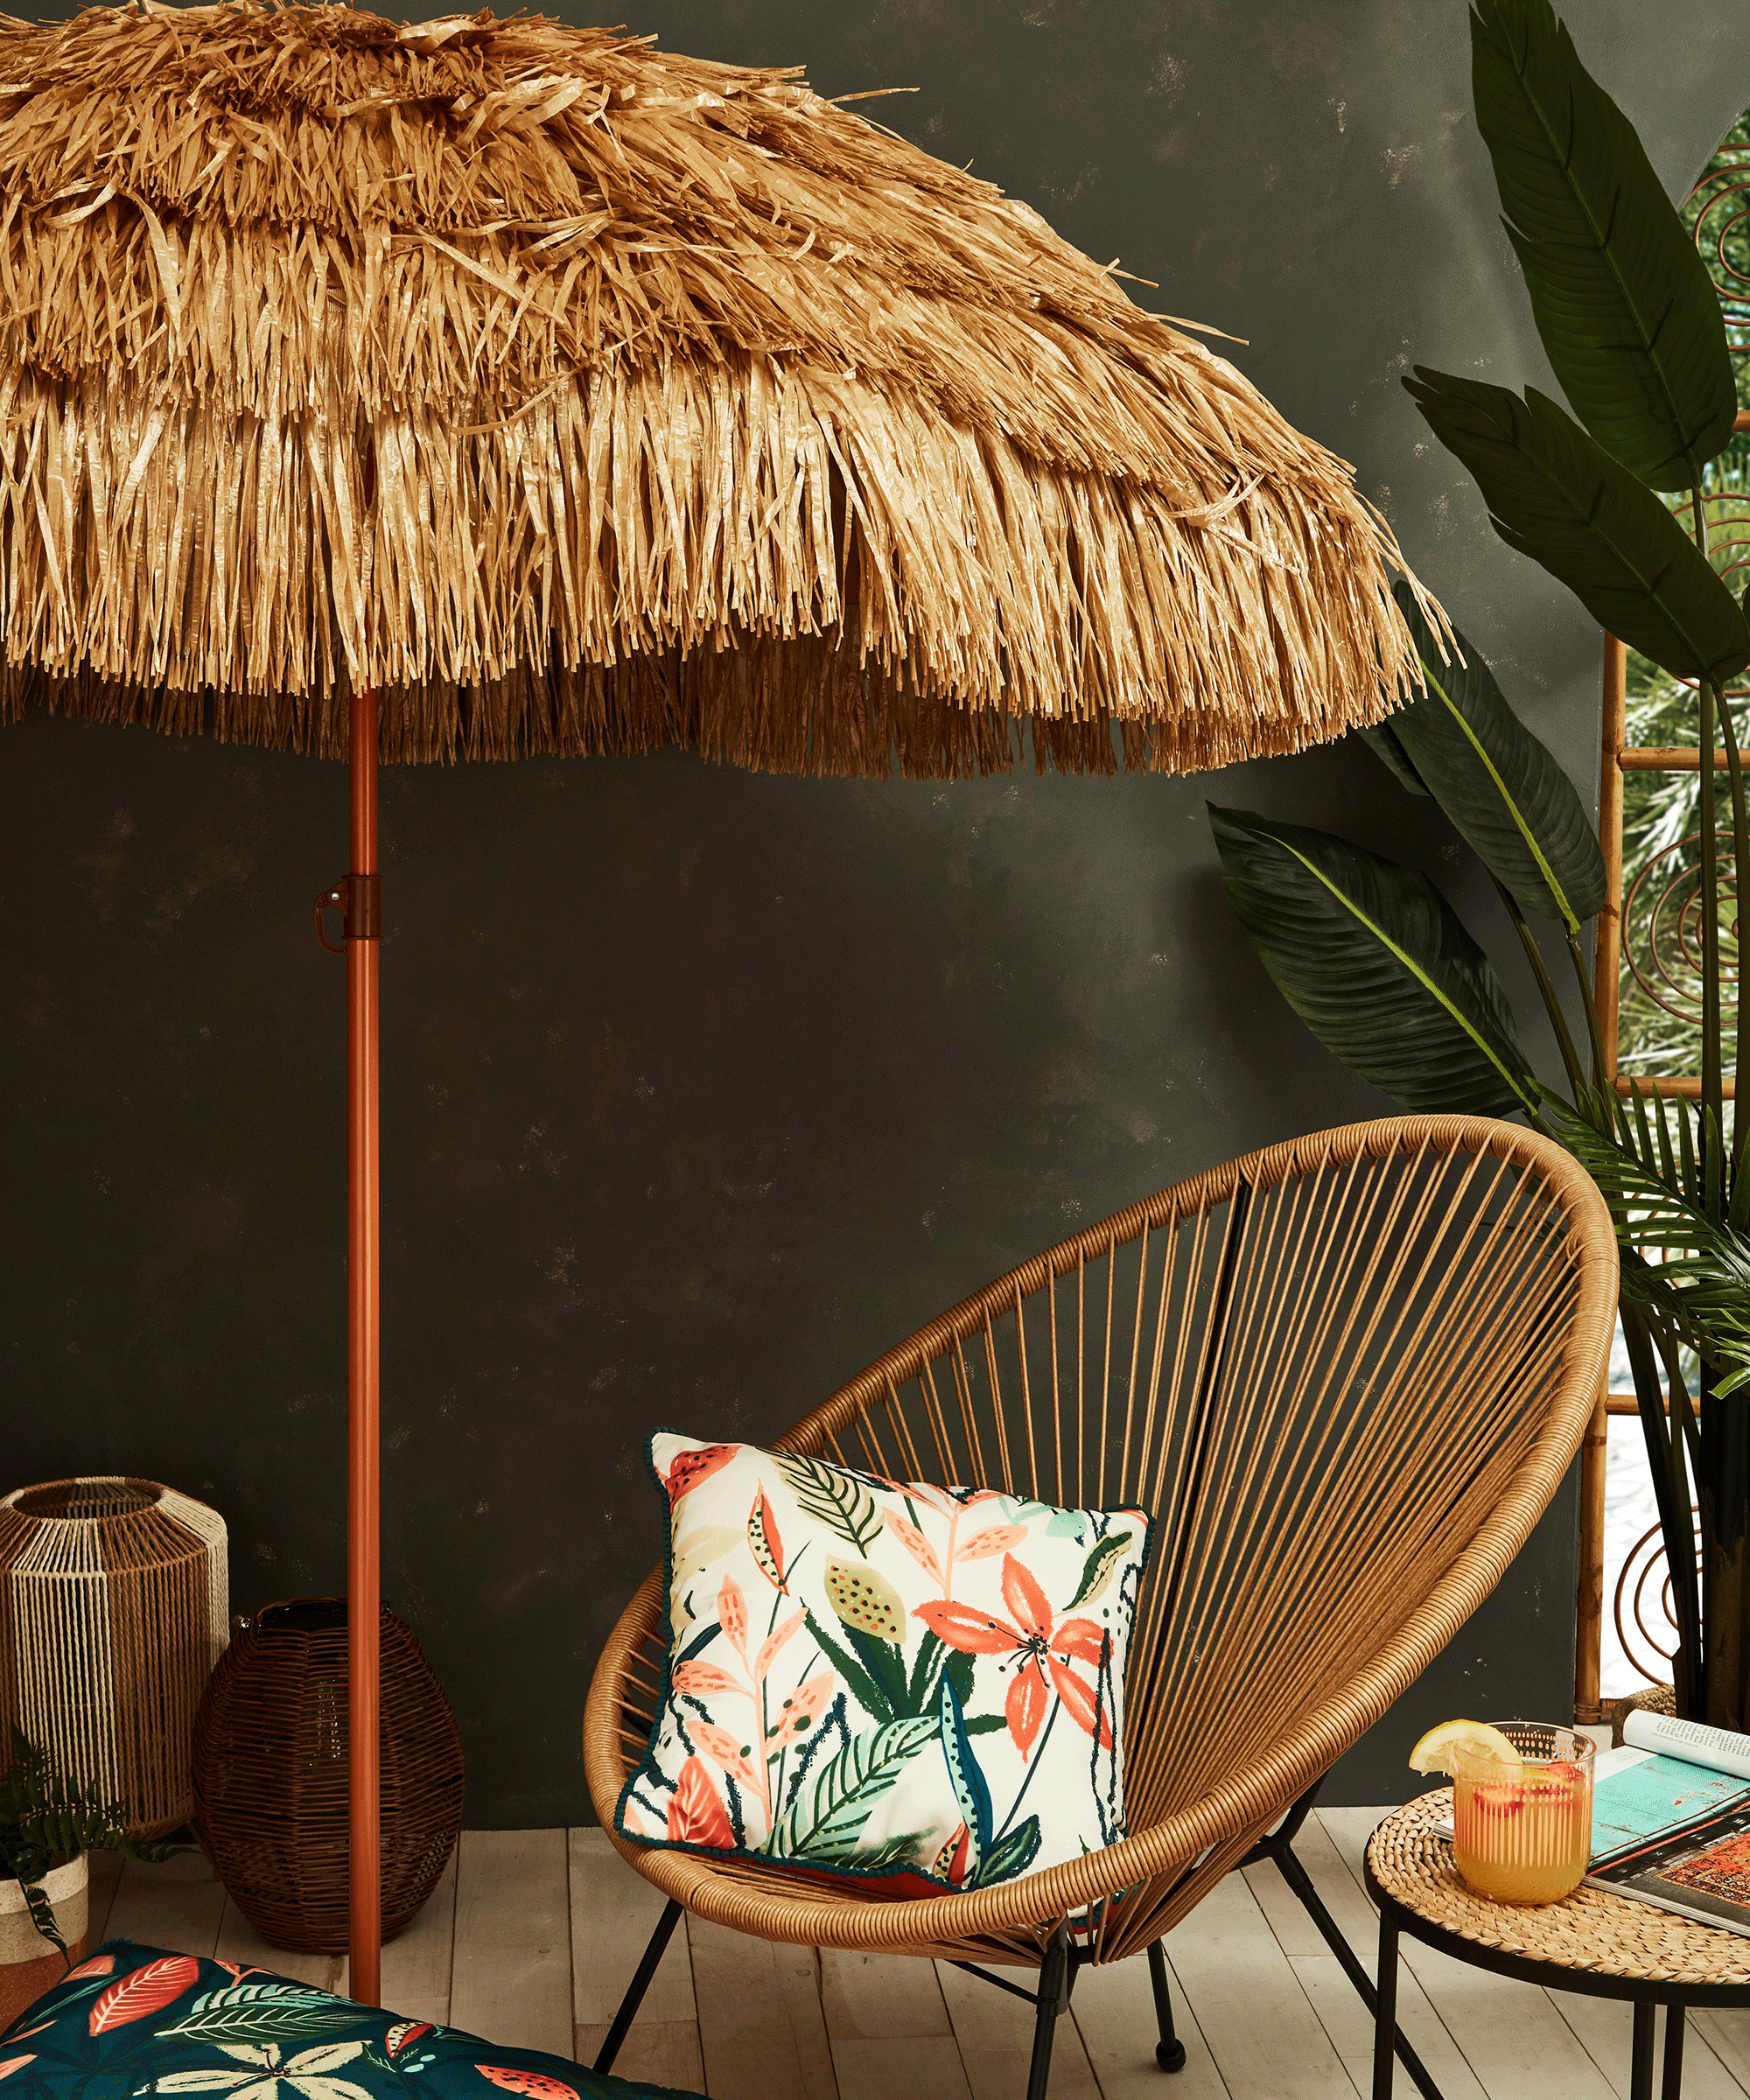 A garden parasol made from synthetic faux grass material with string outdoor chair furniture decor and outdoor cushions